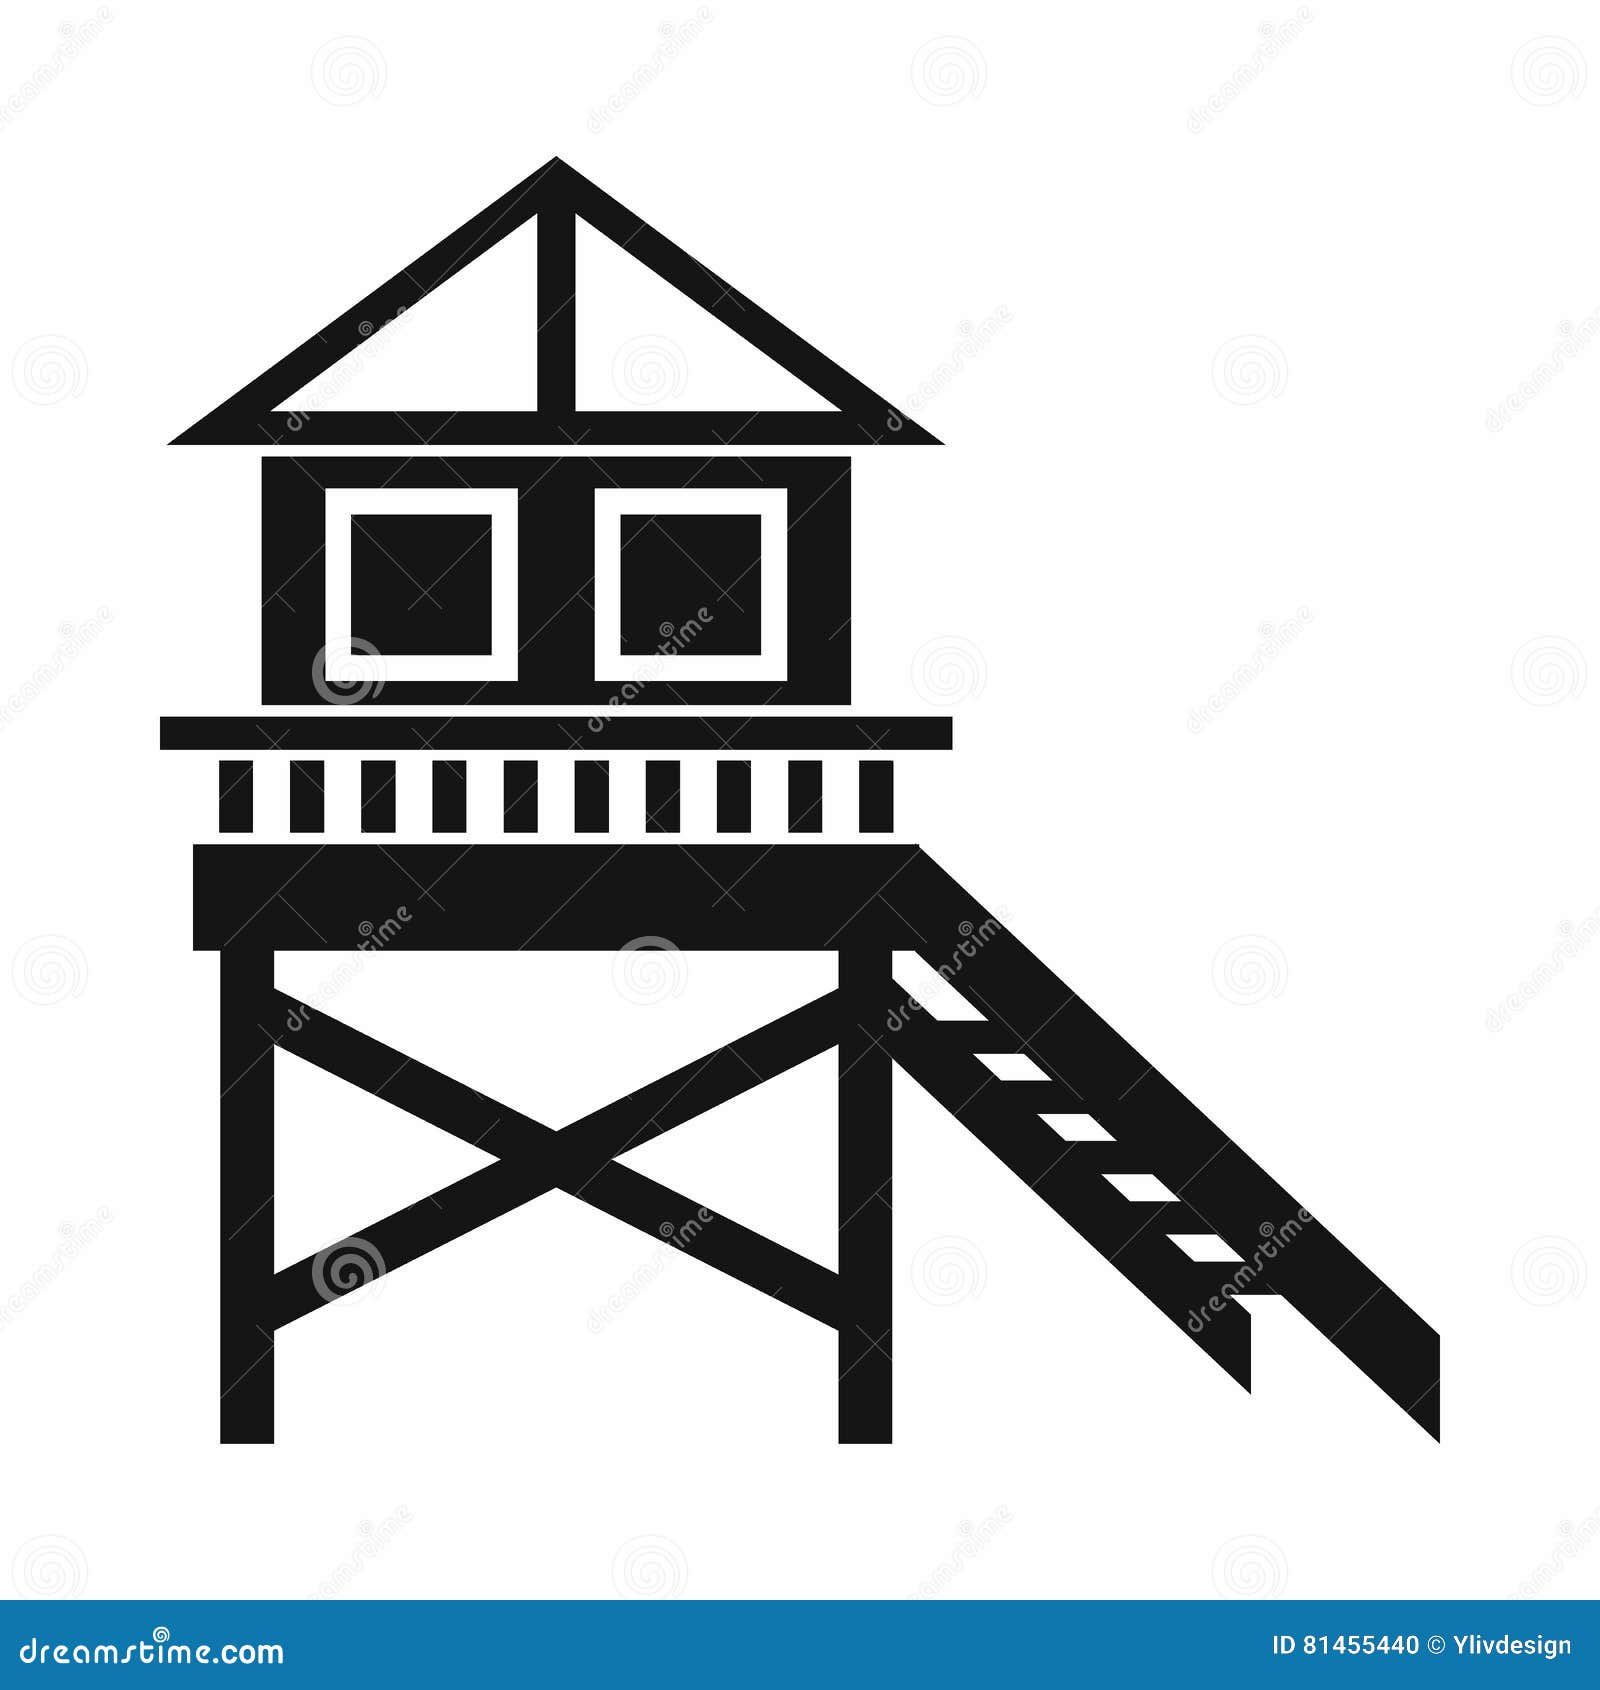 Draw and label a stilt house ​ - Brainly.in